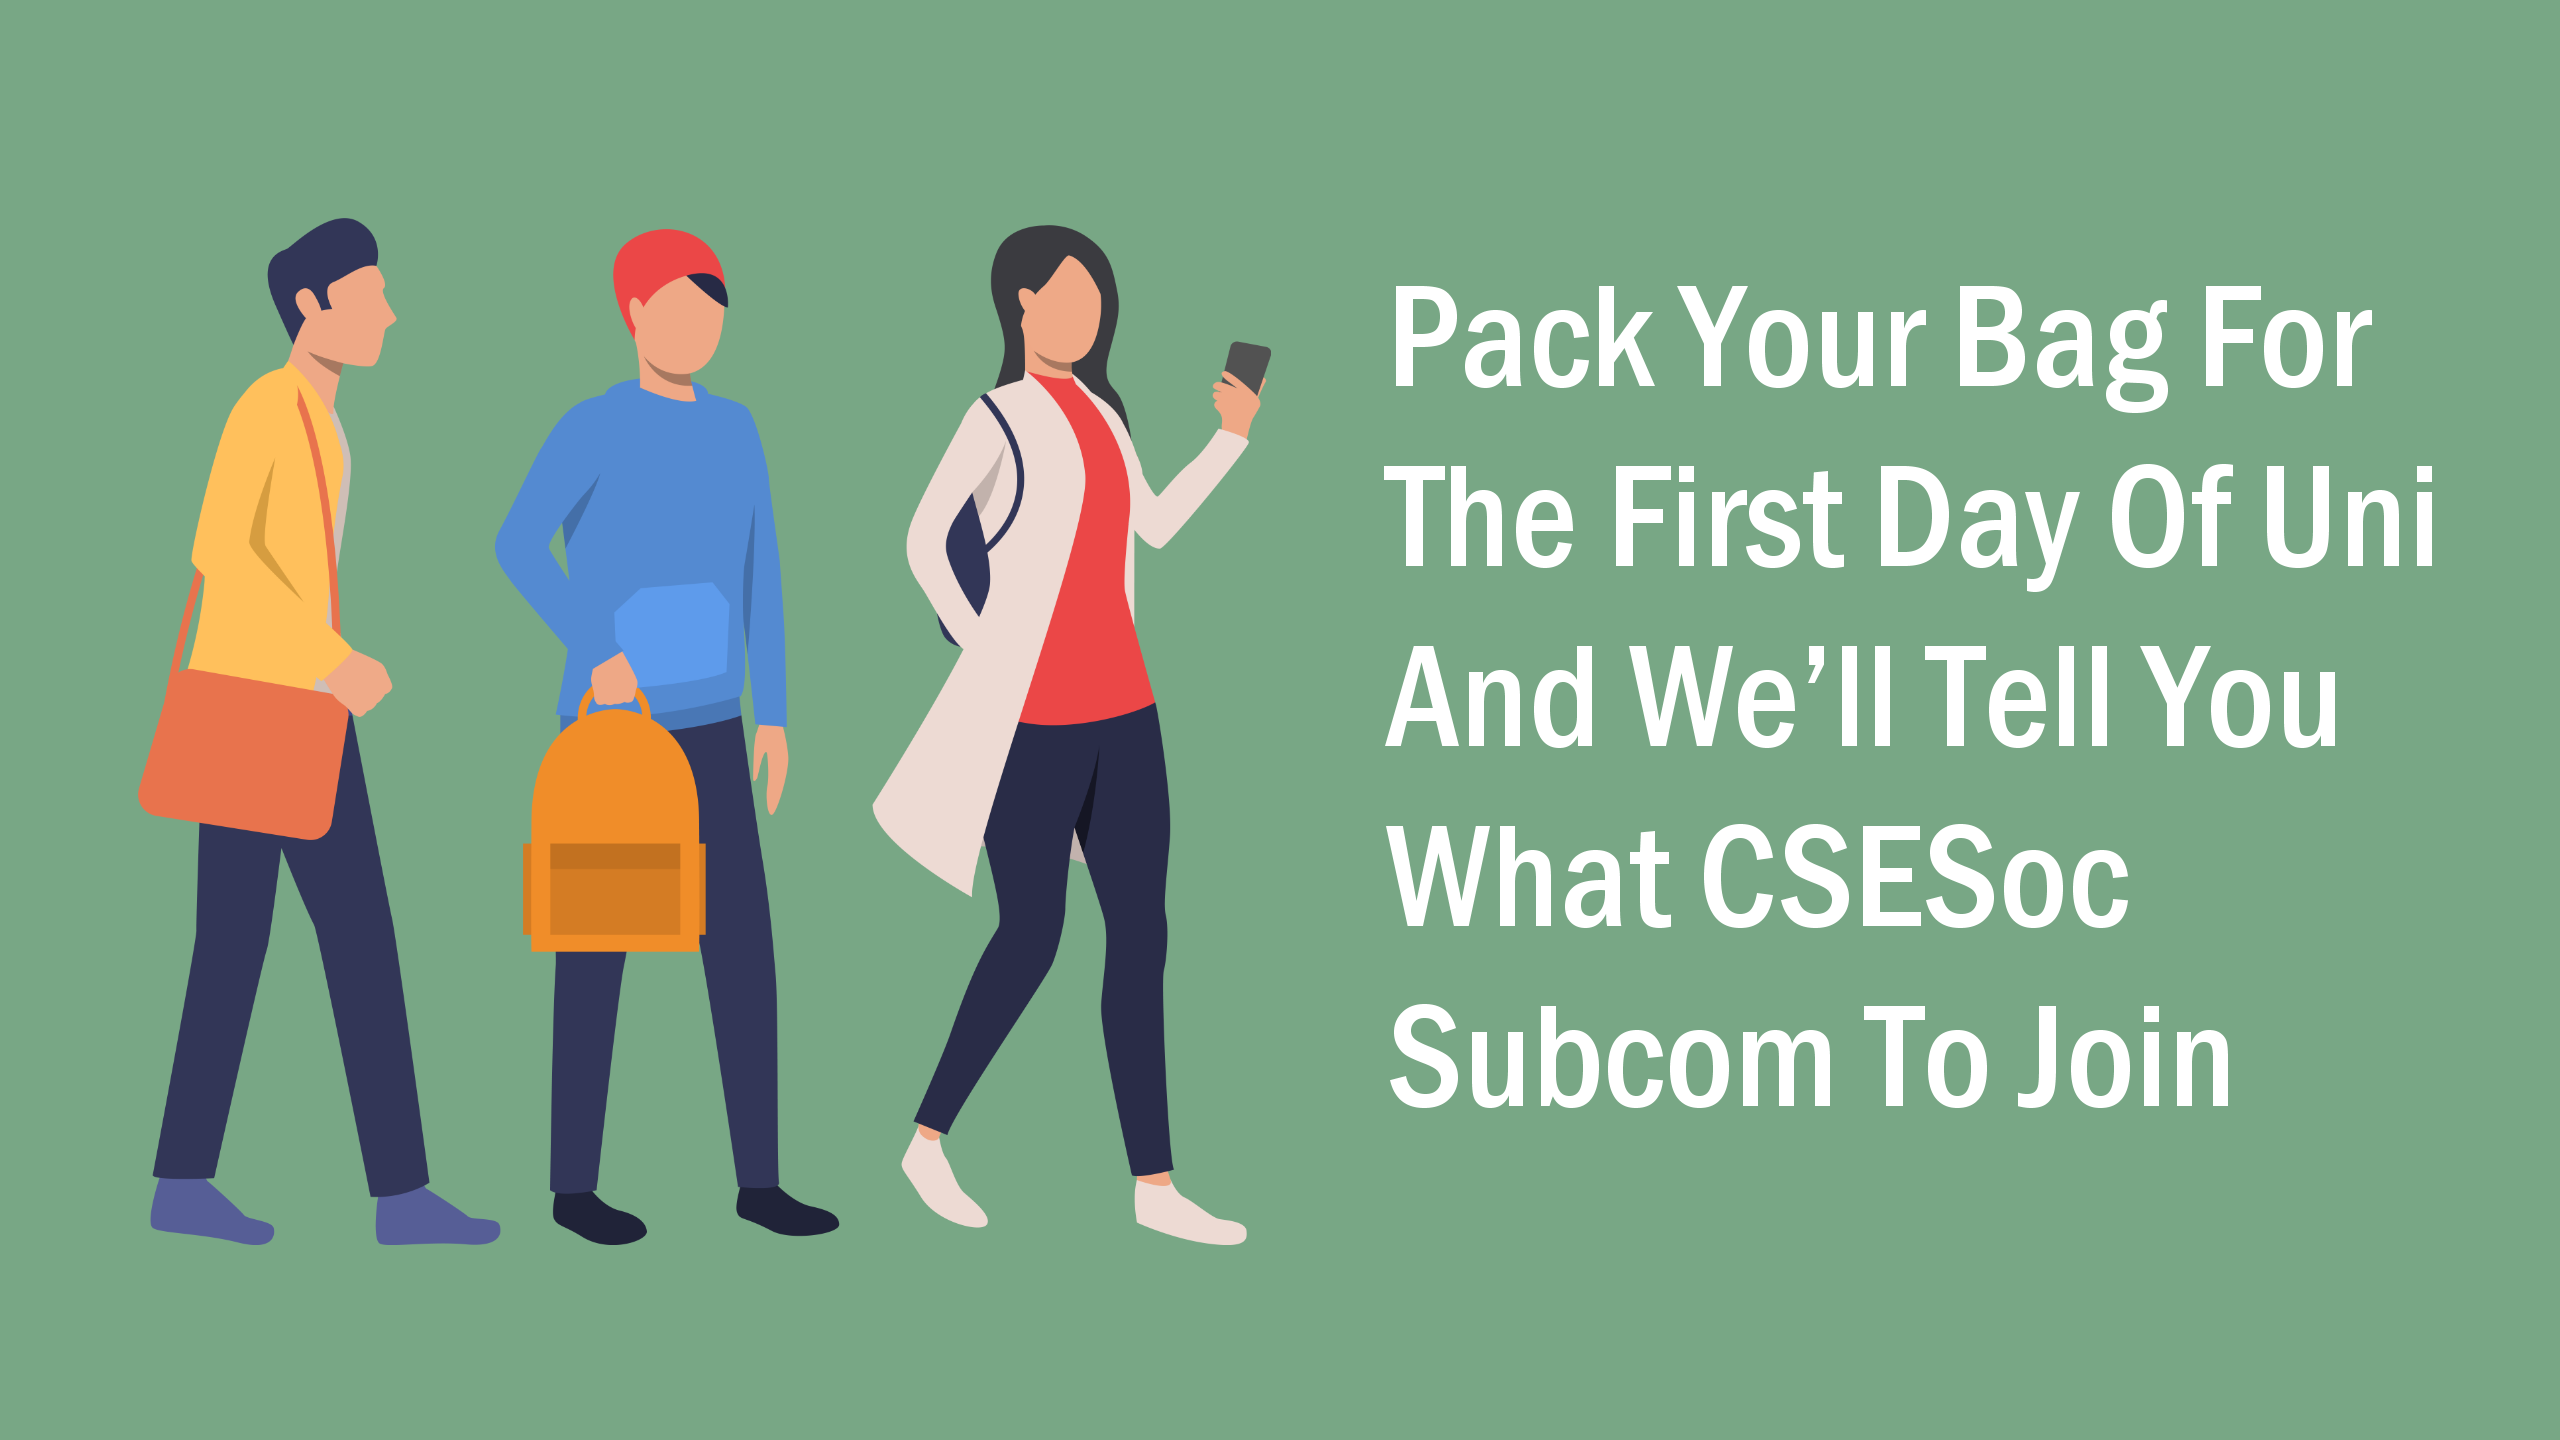 Pack Your Bag For The First Day Of Uni And We’ll Tell You What CSESoc Subcom To Join